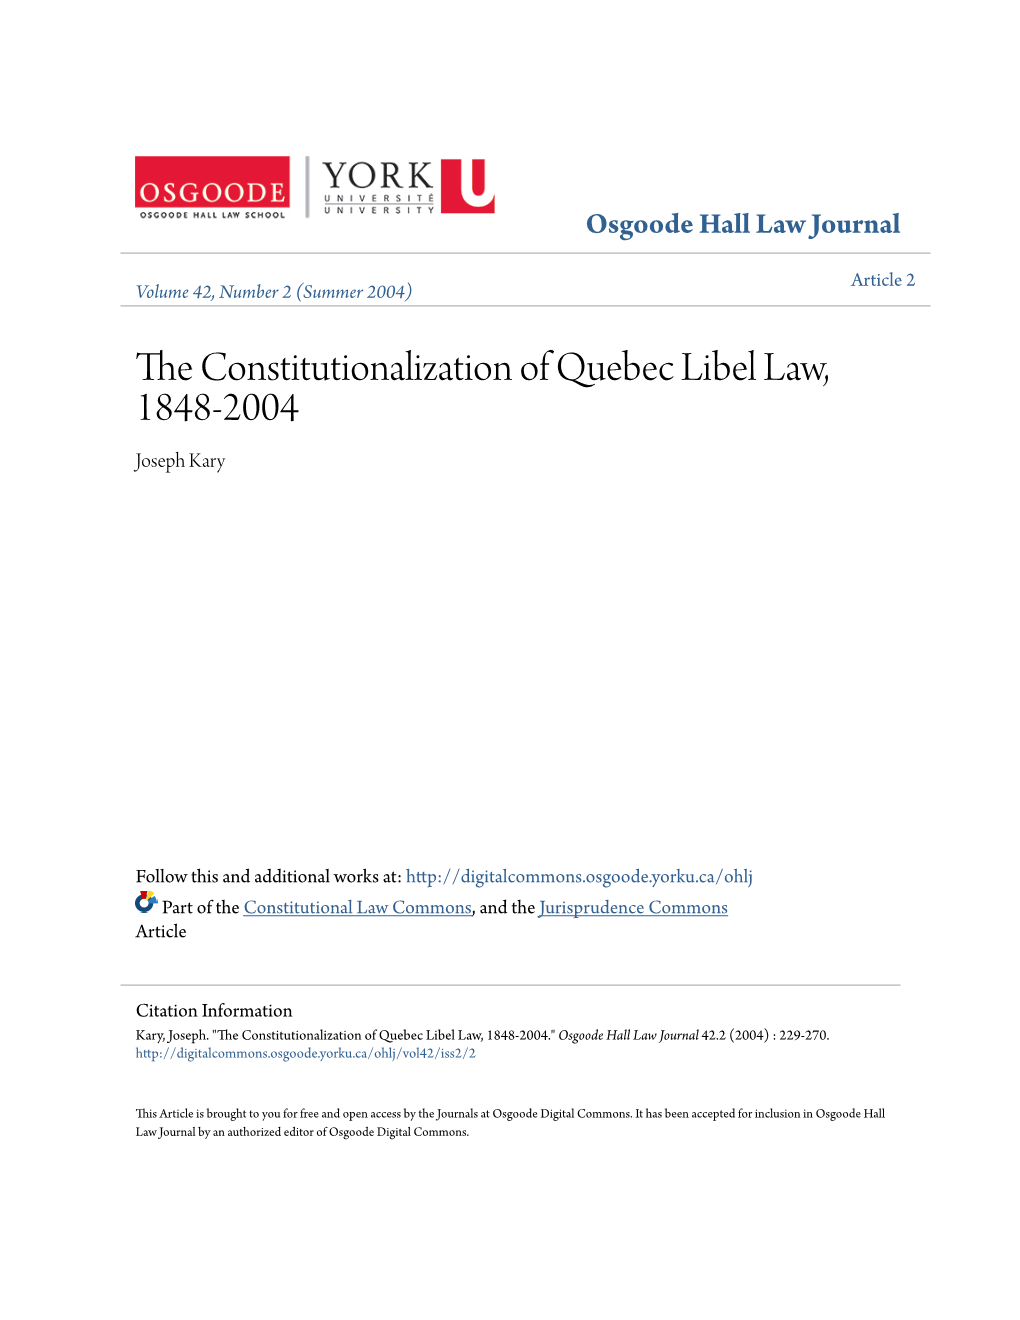 The Constitutionalization of Quebec Libel Law, 1848-2004©